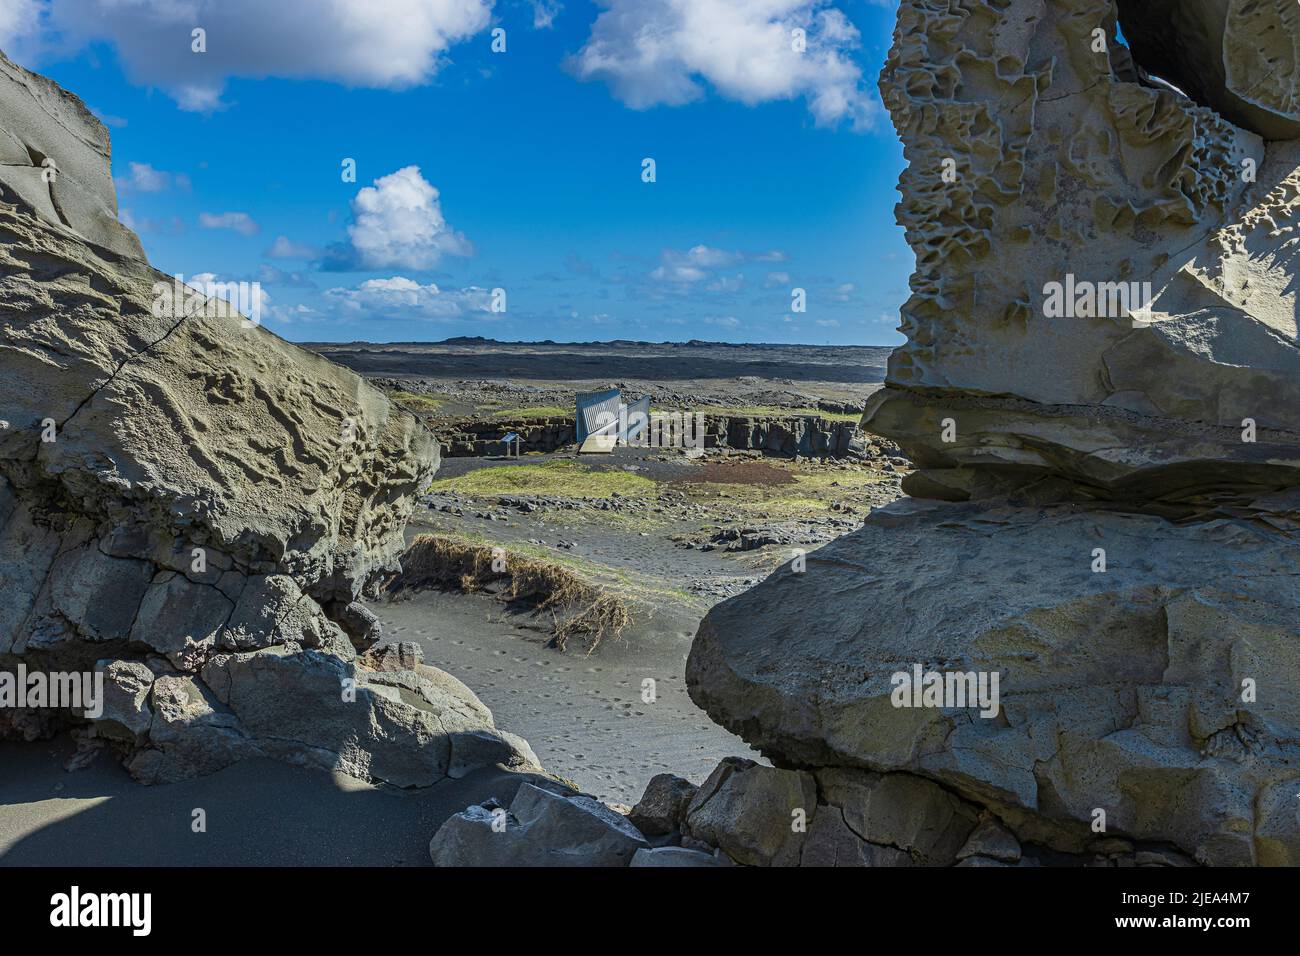 View between two rocks on a bridge. Landscape of Iceland on the Reykjanes peninsula. Lava stones and black lava sand with grass blades. sunshine Stock Photo